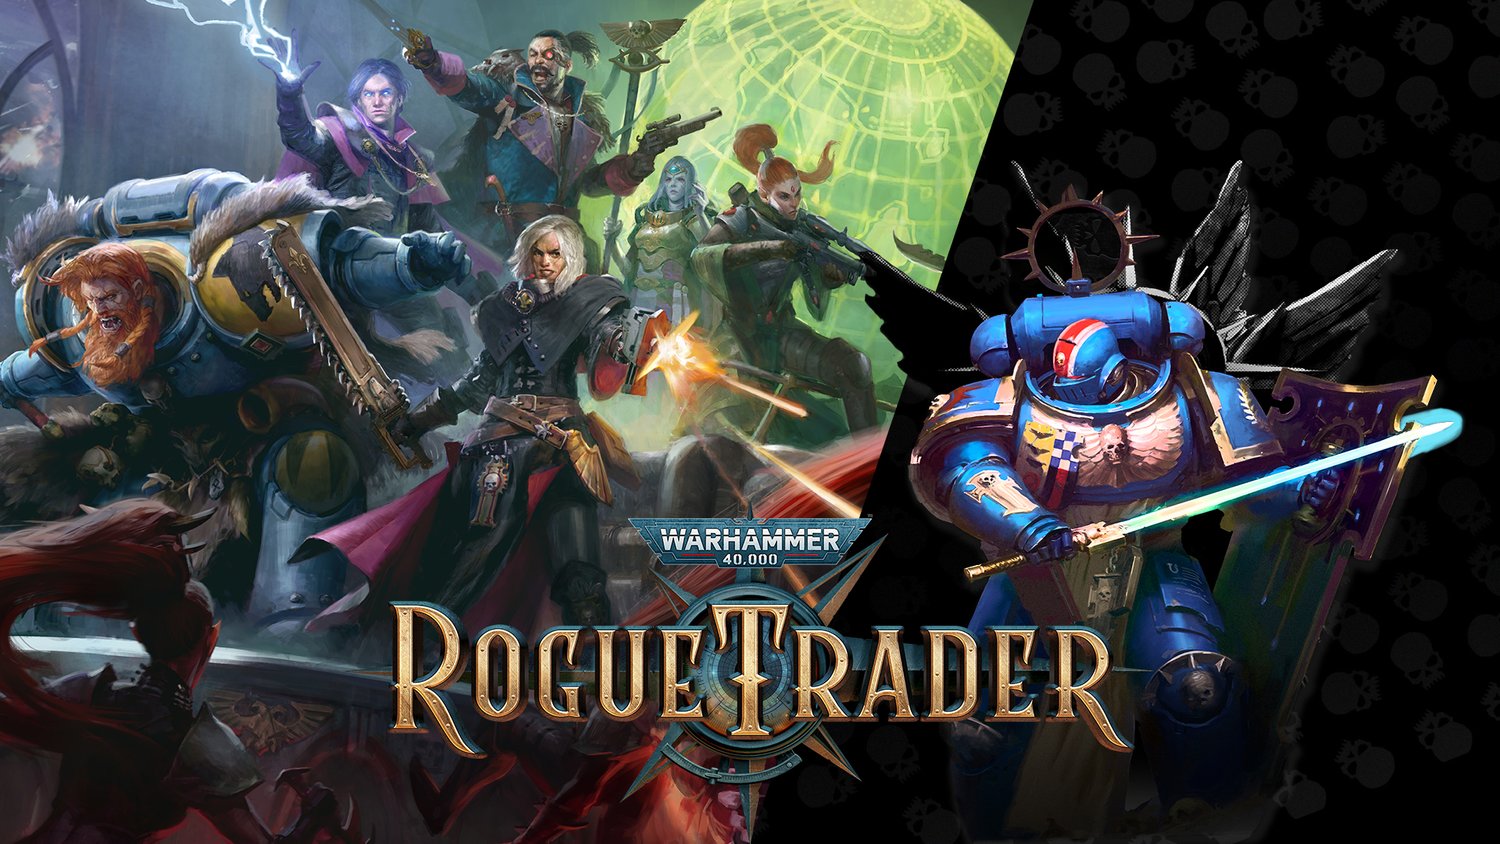 Warhammer 000: Rogue Trader is bringing tactical combat back to the universe